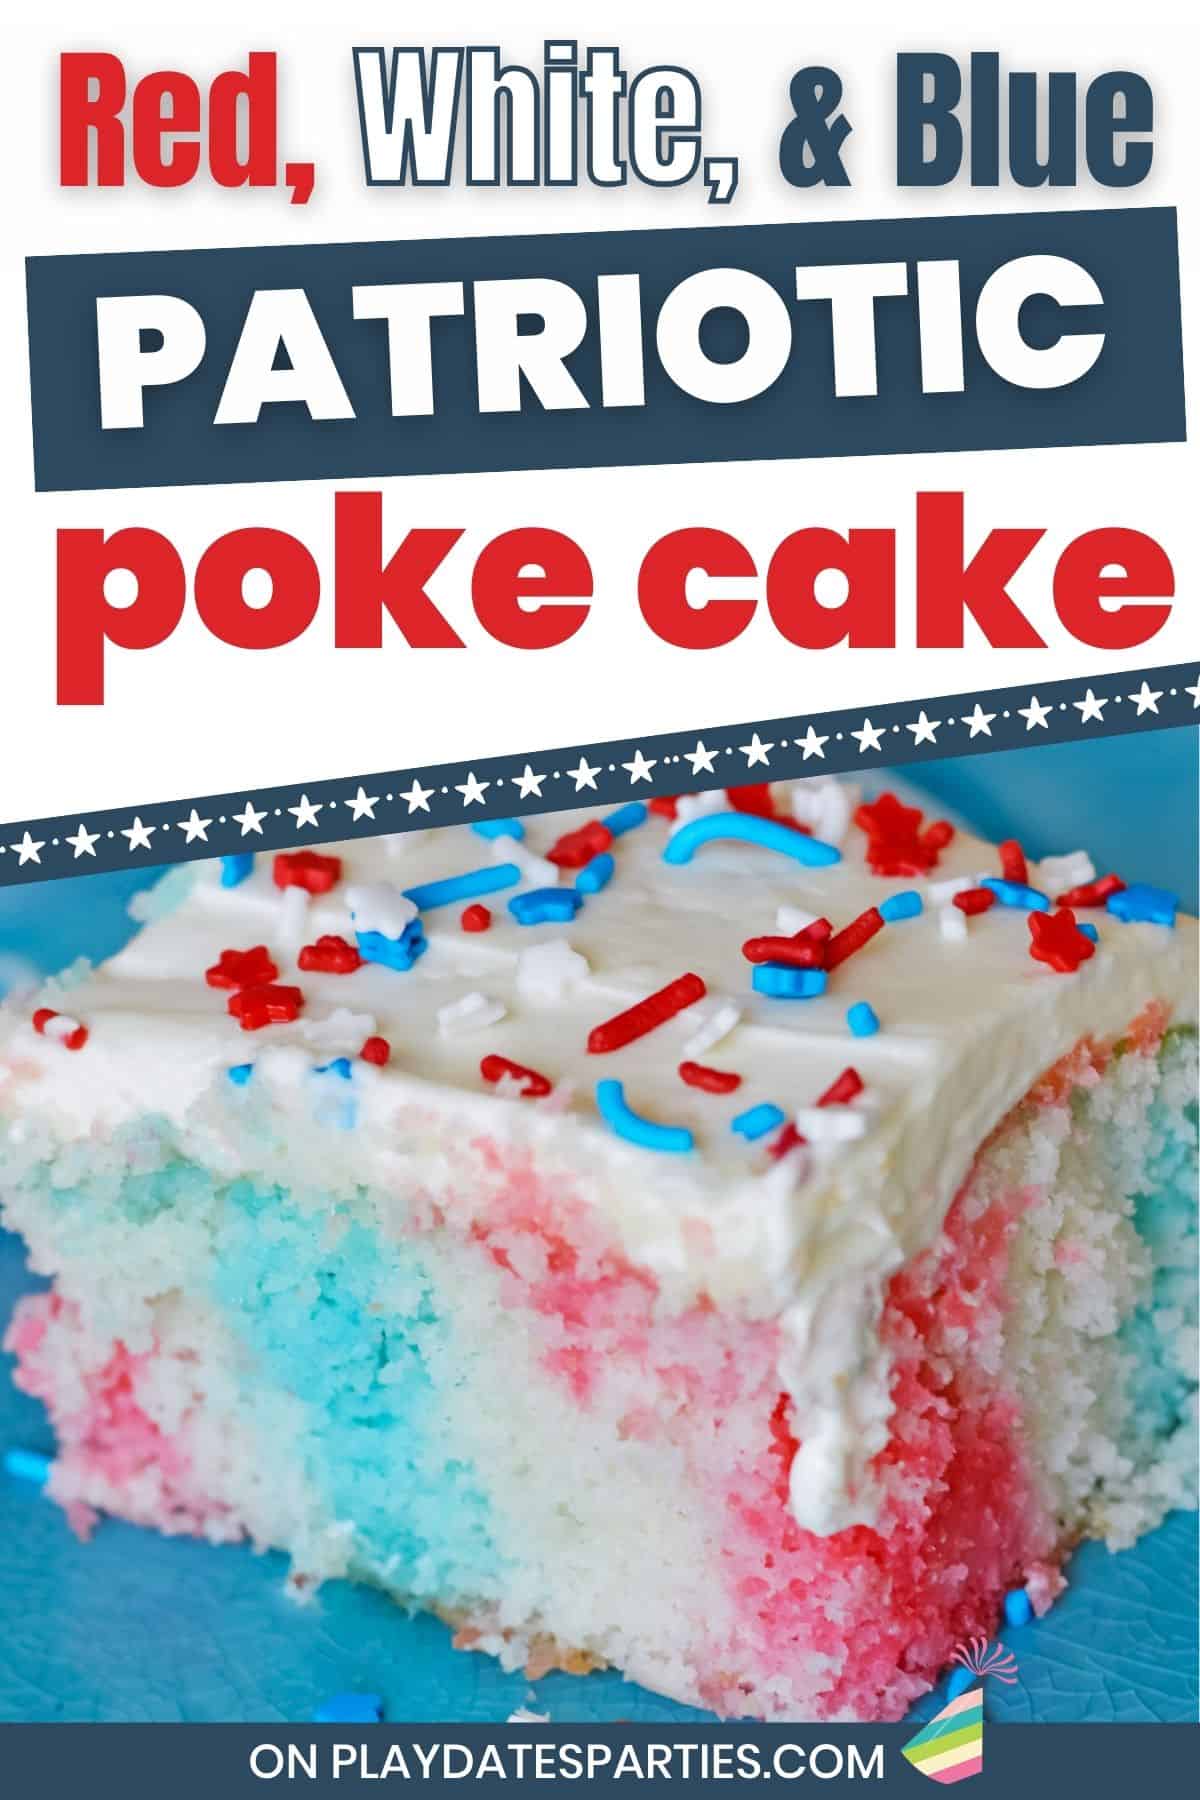 A slice of cake on a blue plate with text overlay red, white, and blue patriotic poke cake.